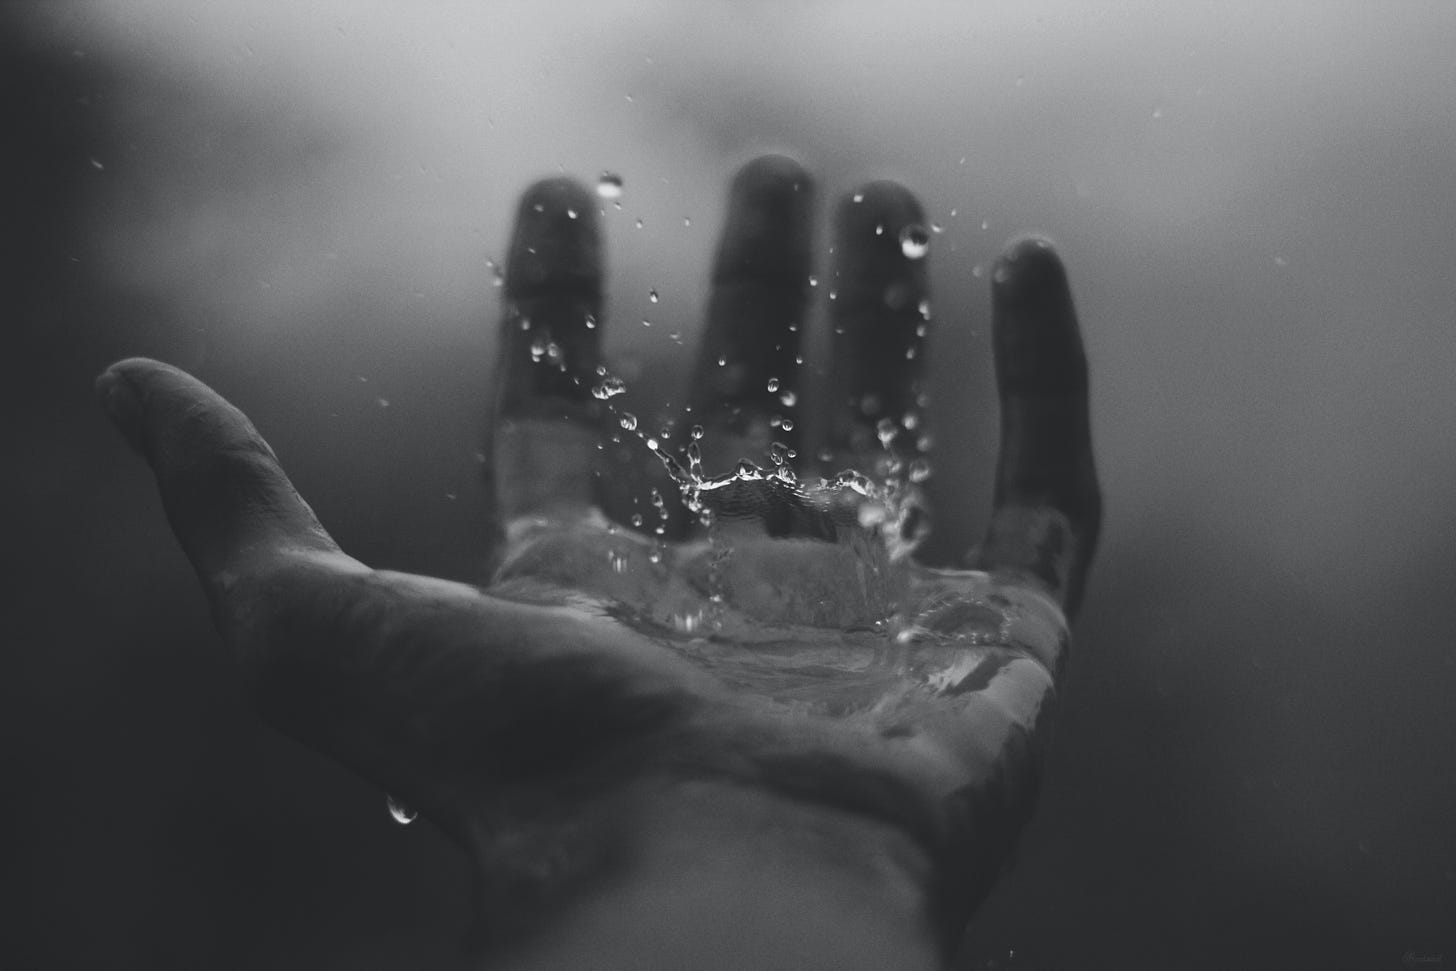 A raindrop splashes in someone's left hand. The picture is black and white.